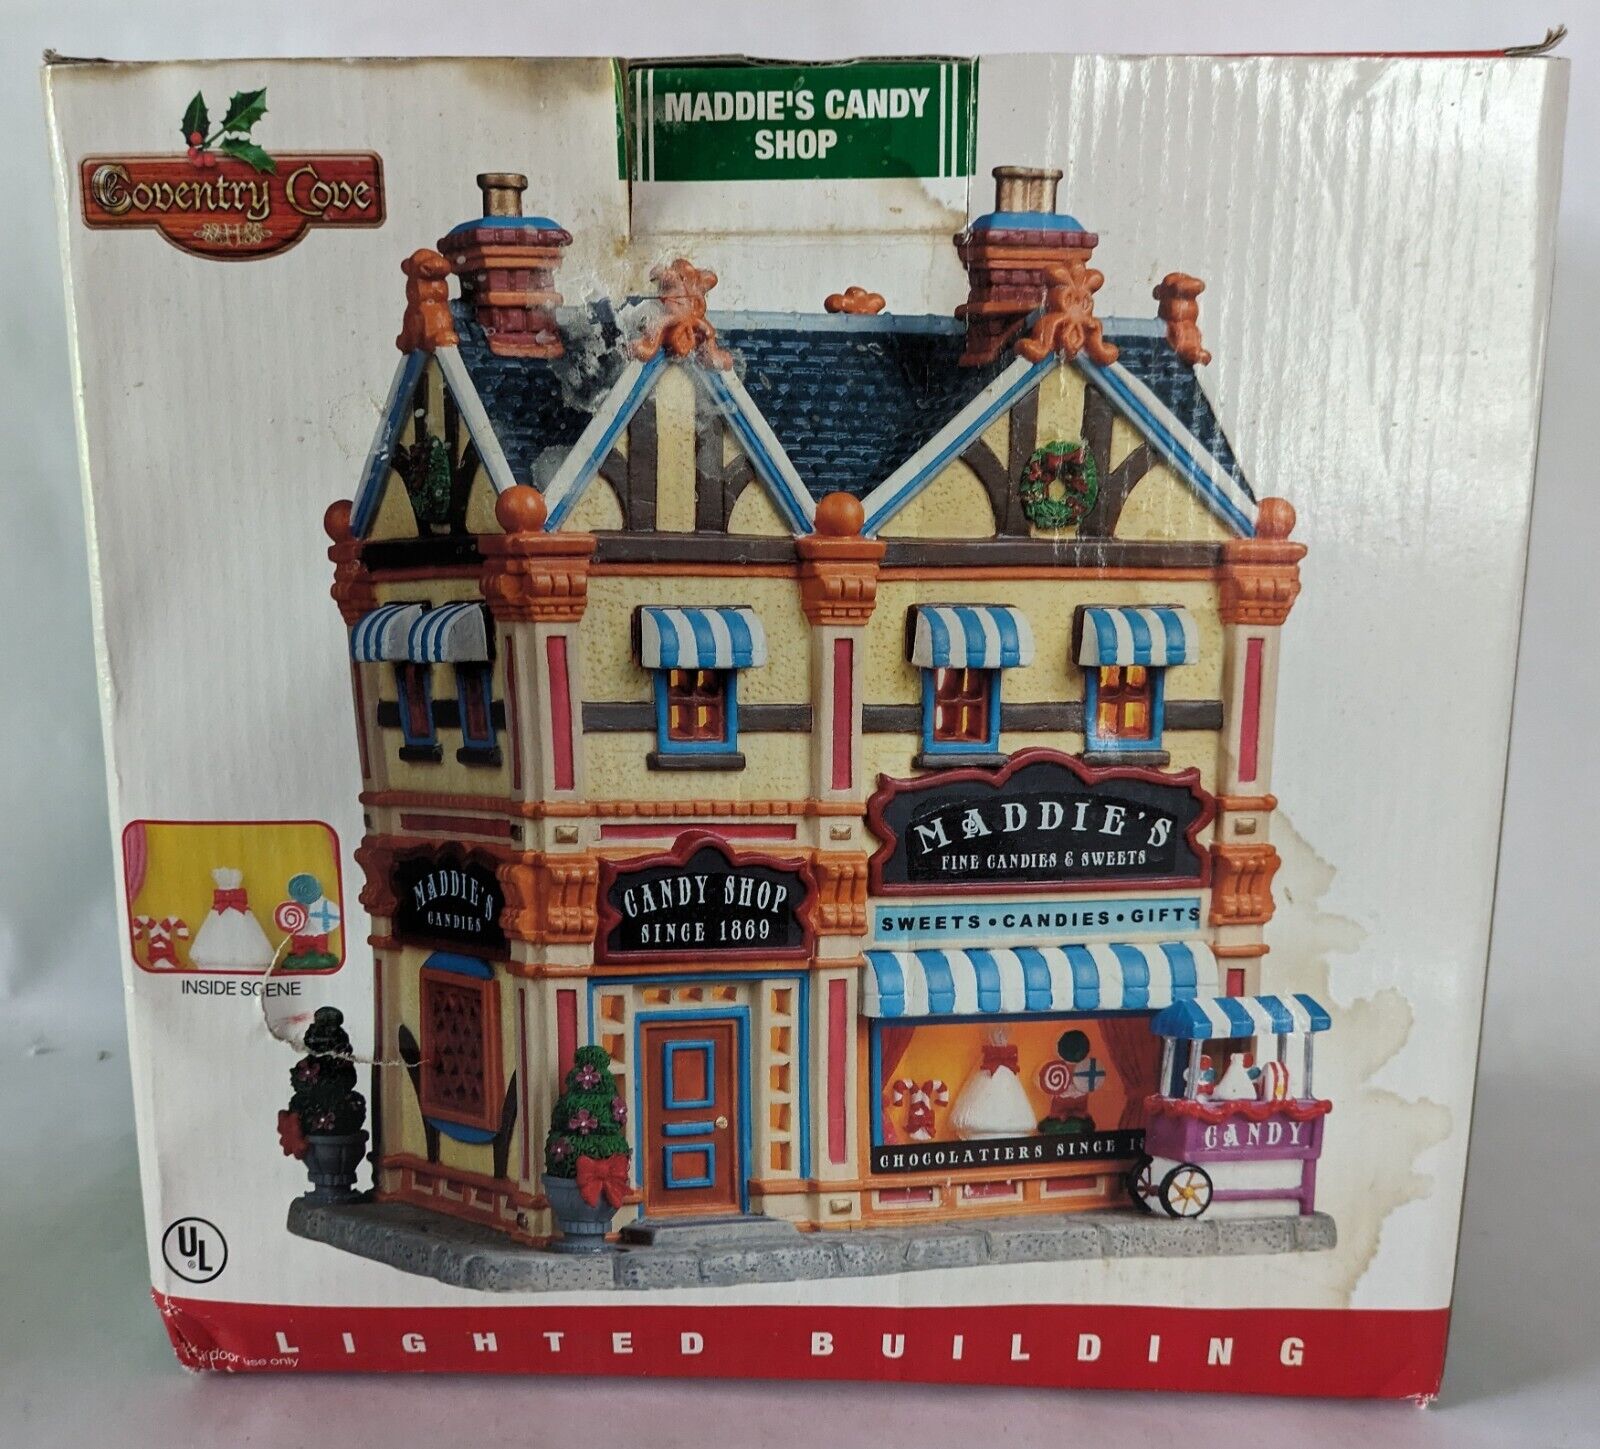 2009 Lemax Coventry Cove Maddie's Candy Shop Lighted Building in Original Box